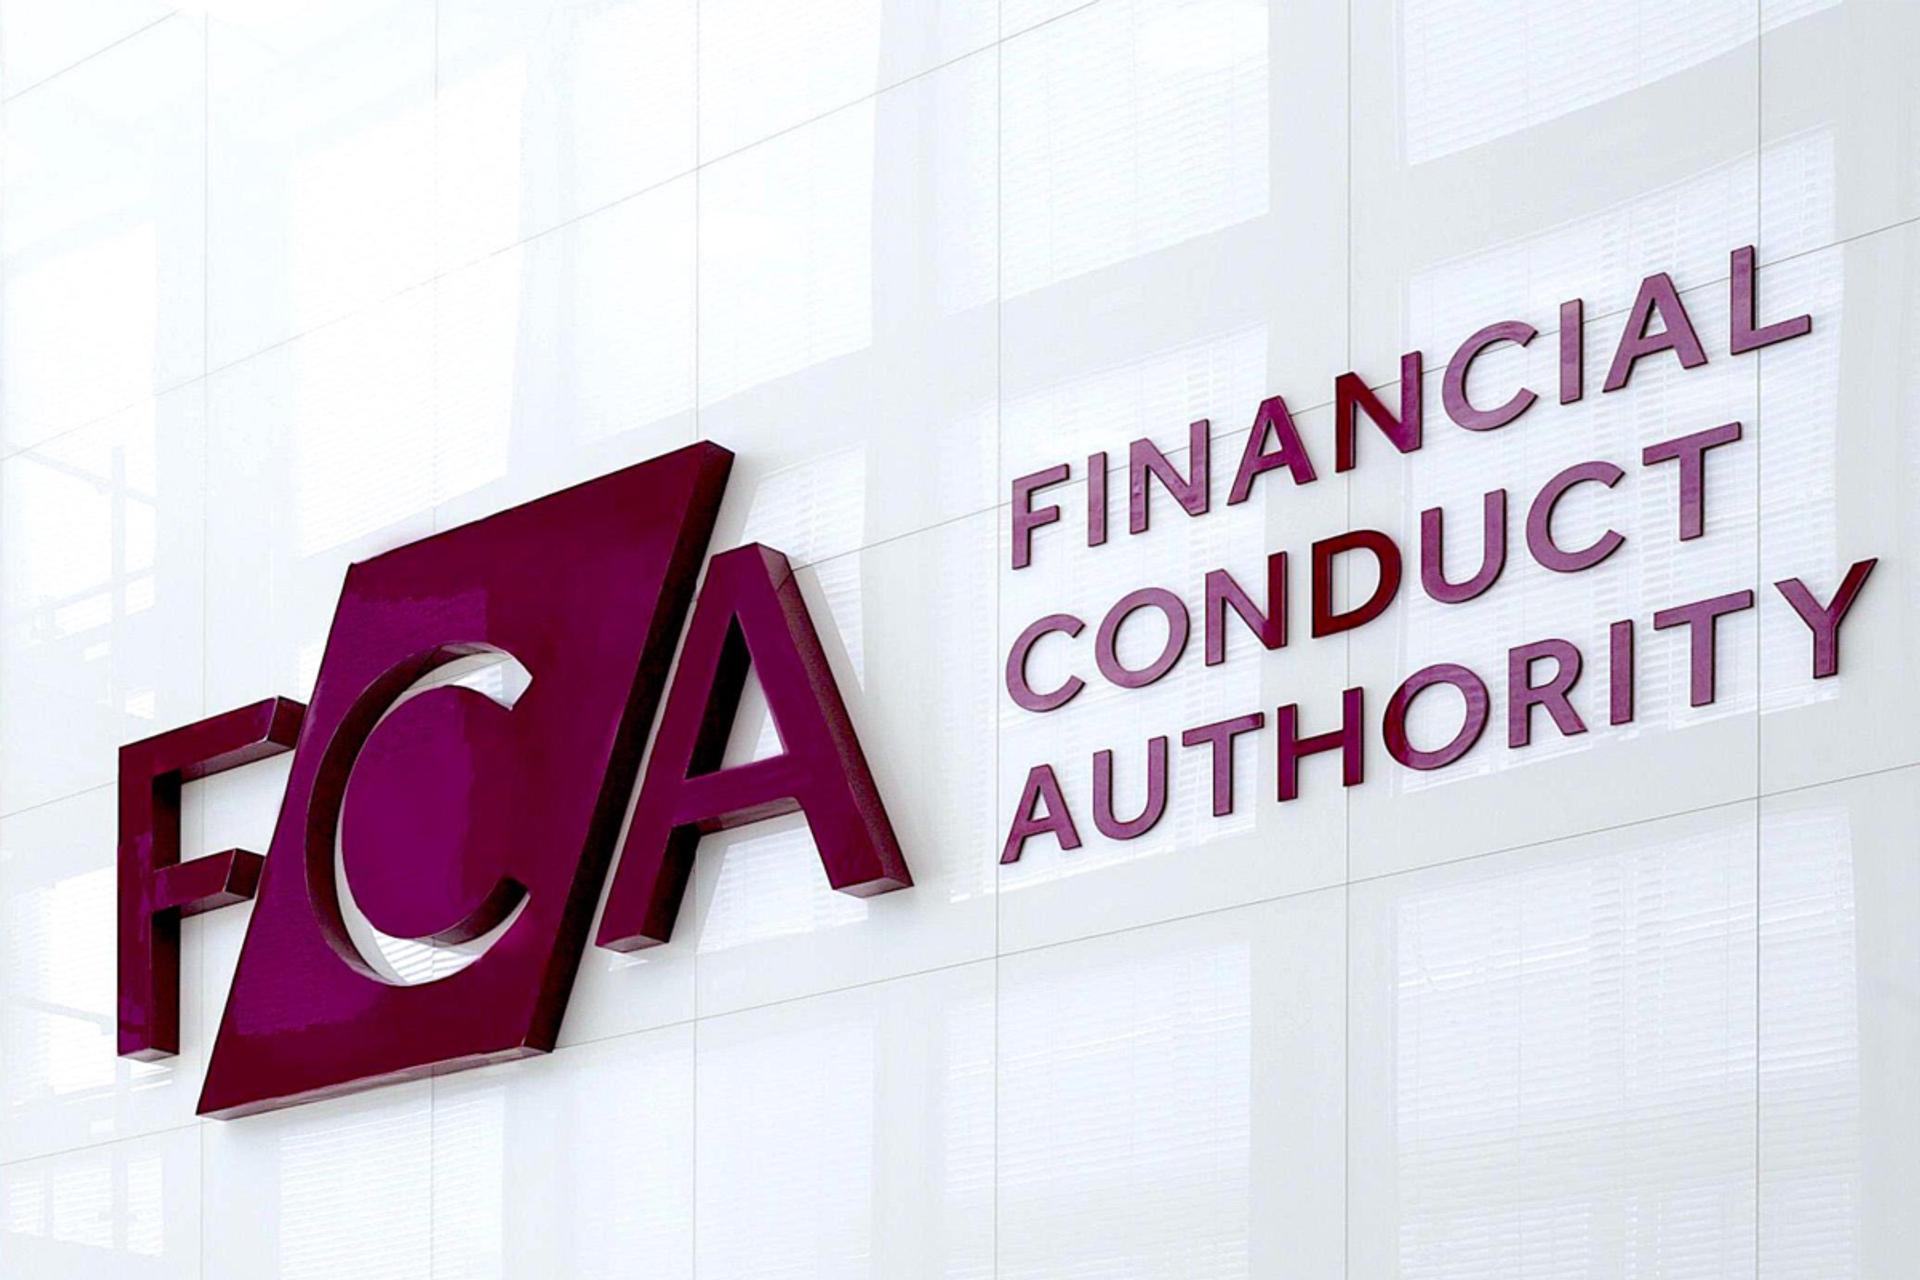 Financial Conduct Authority logo on a white tiled wall